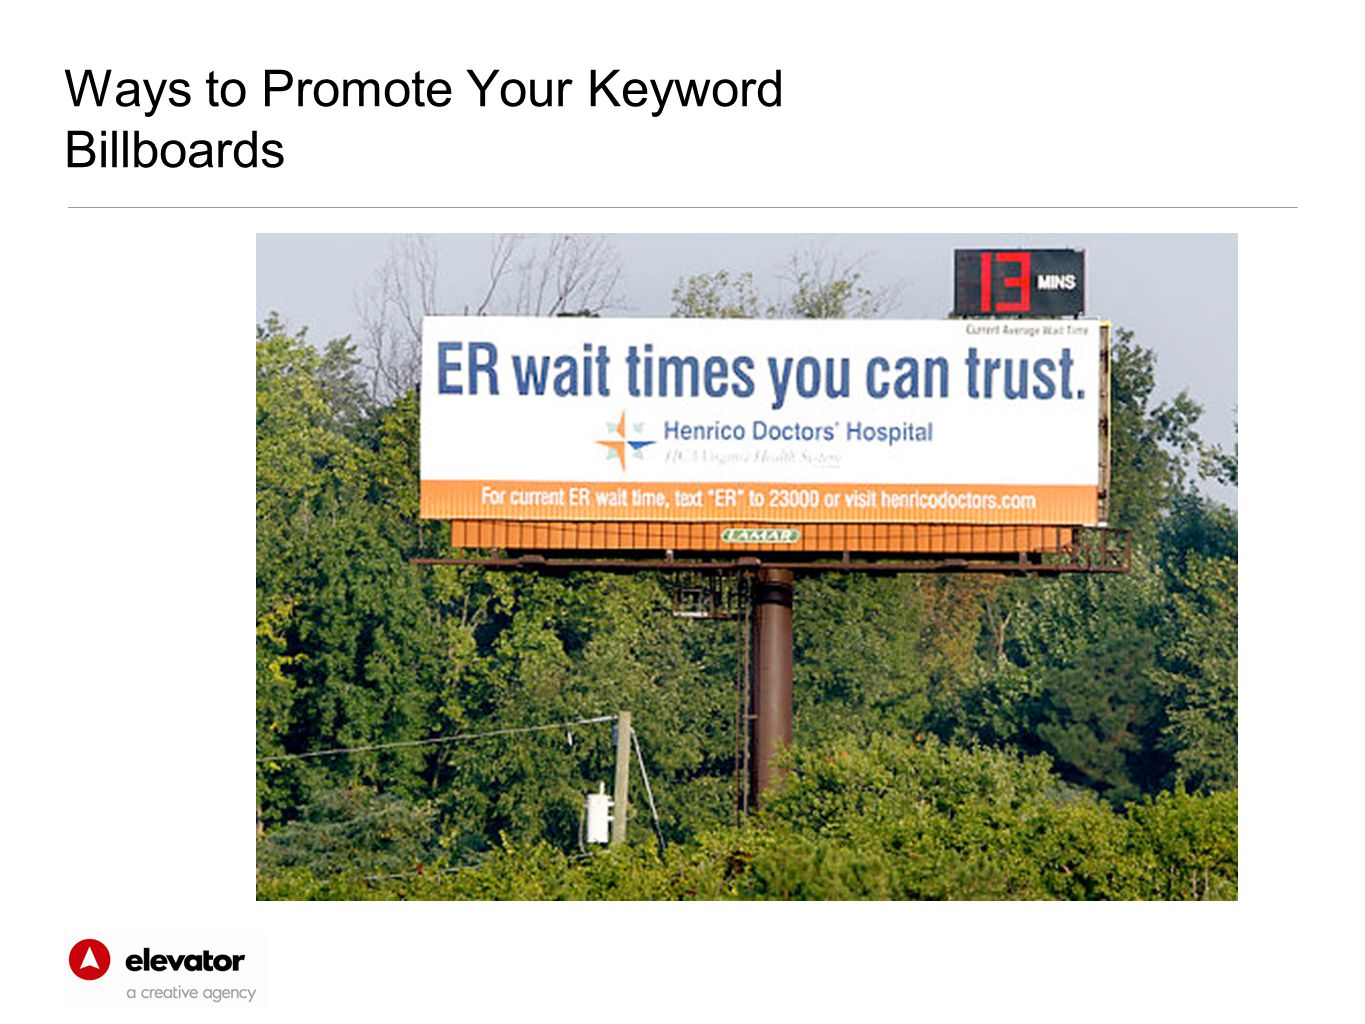 Ways to Promote Your Keyword Billboards